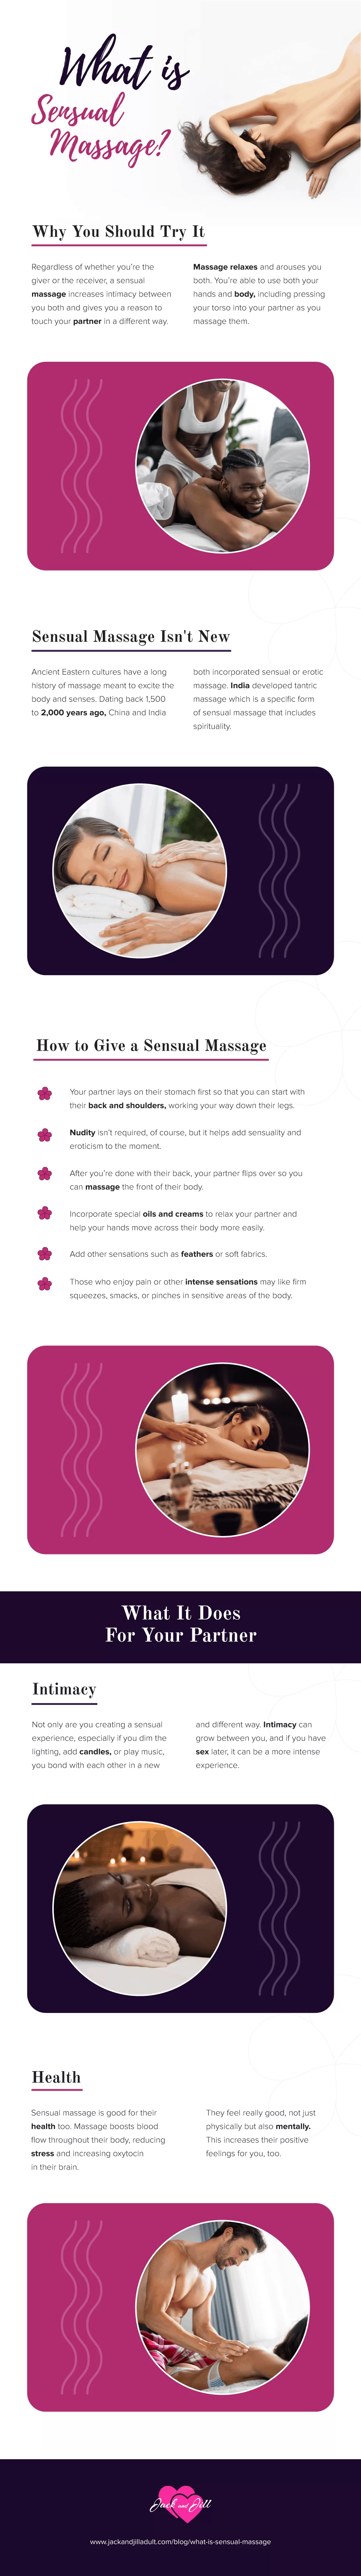 Infographic for What is Sensual Massage?